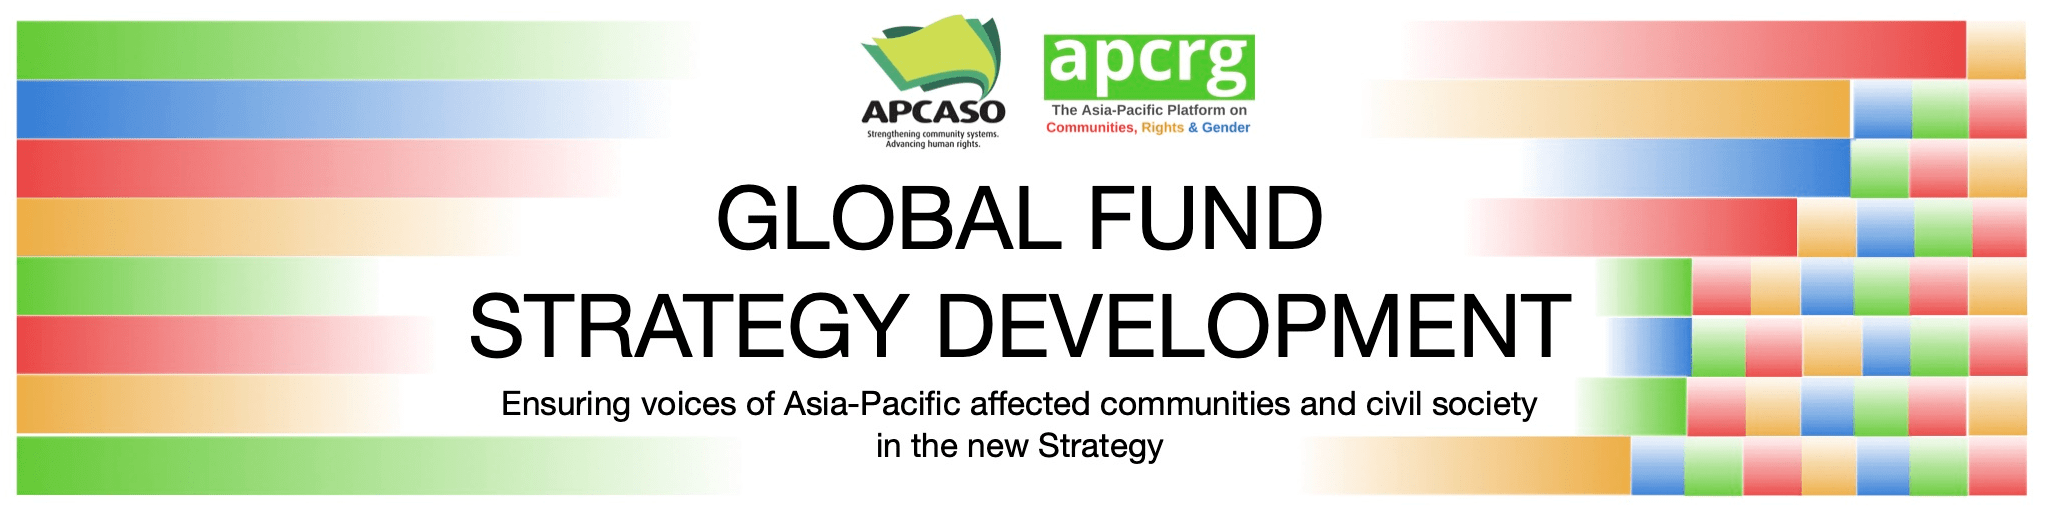 ENSURING VOICES of communities and civil society IN THE GLOBAL FUND STRATEGY DEVELOPMENT